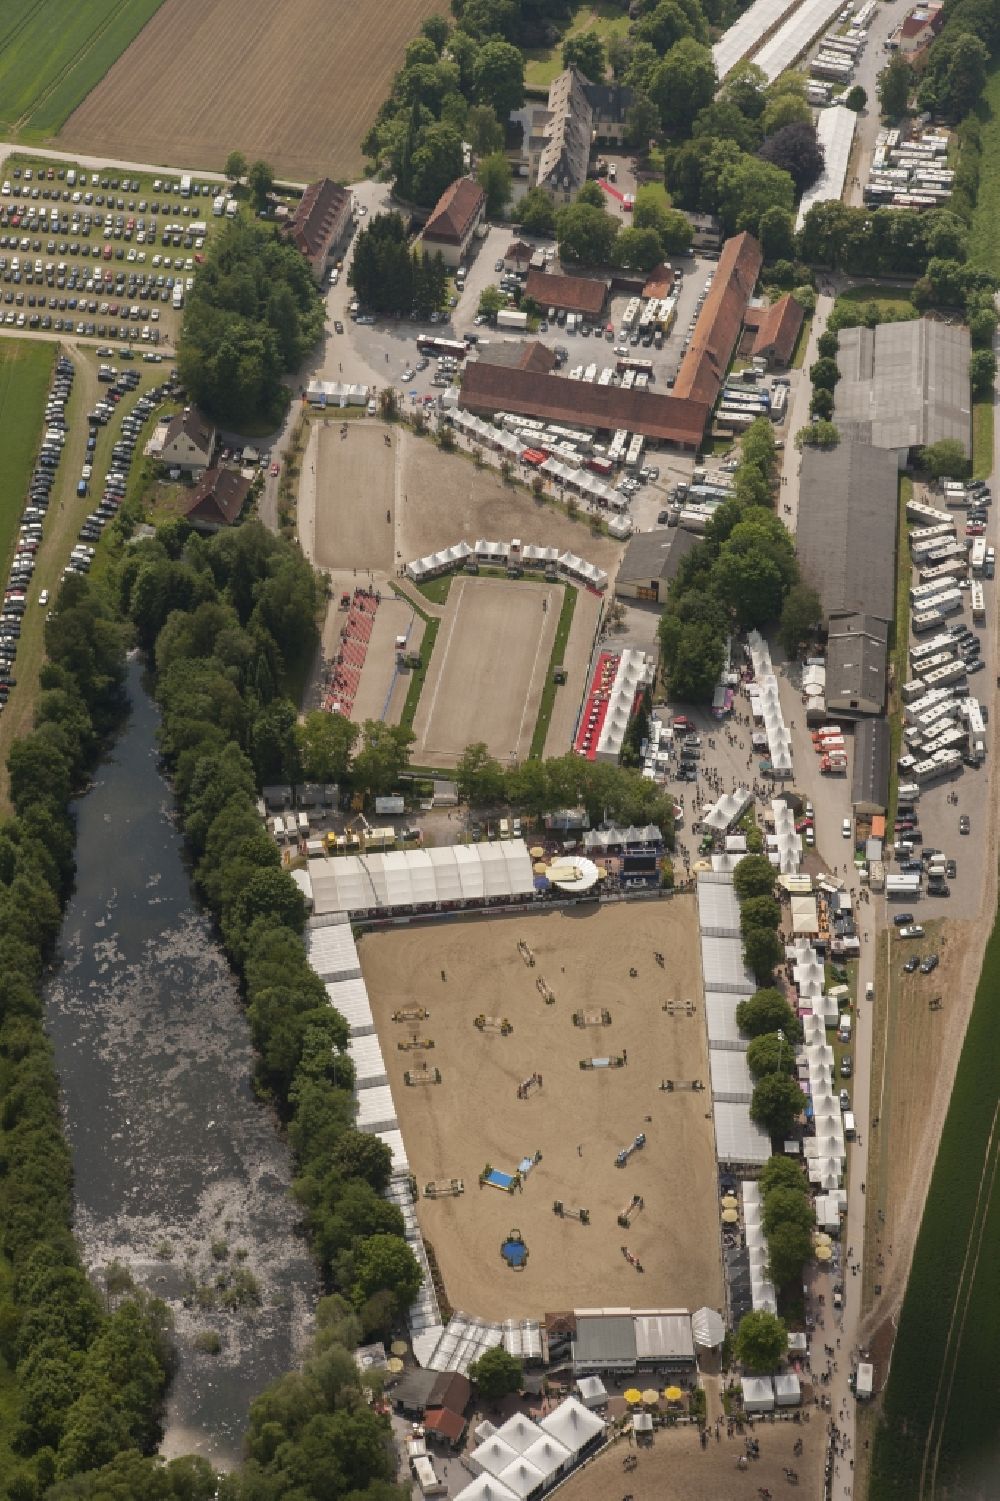 Balve from the bird's eye view: The German Championship in Jumping in Balve in the state of North Rhine-Westphalia North Rhine-Westphalia